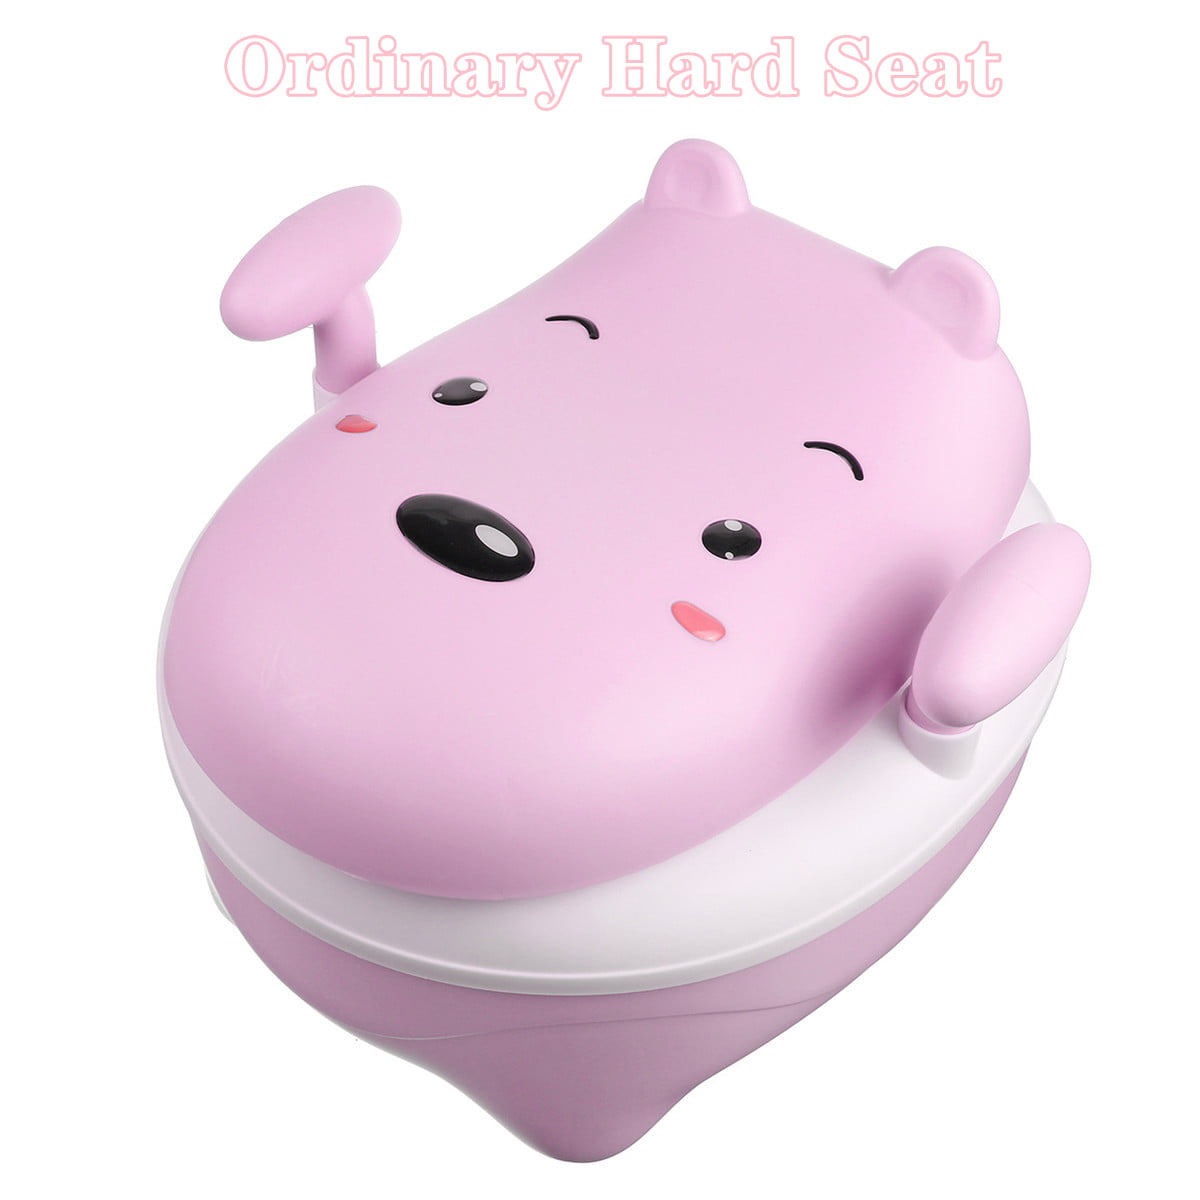 PINK CHILD TOILET SEAT POTTY TRAINING SEAT CHAIR REMOVABLE LID KIDS BABY NEW 